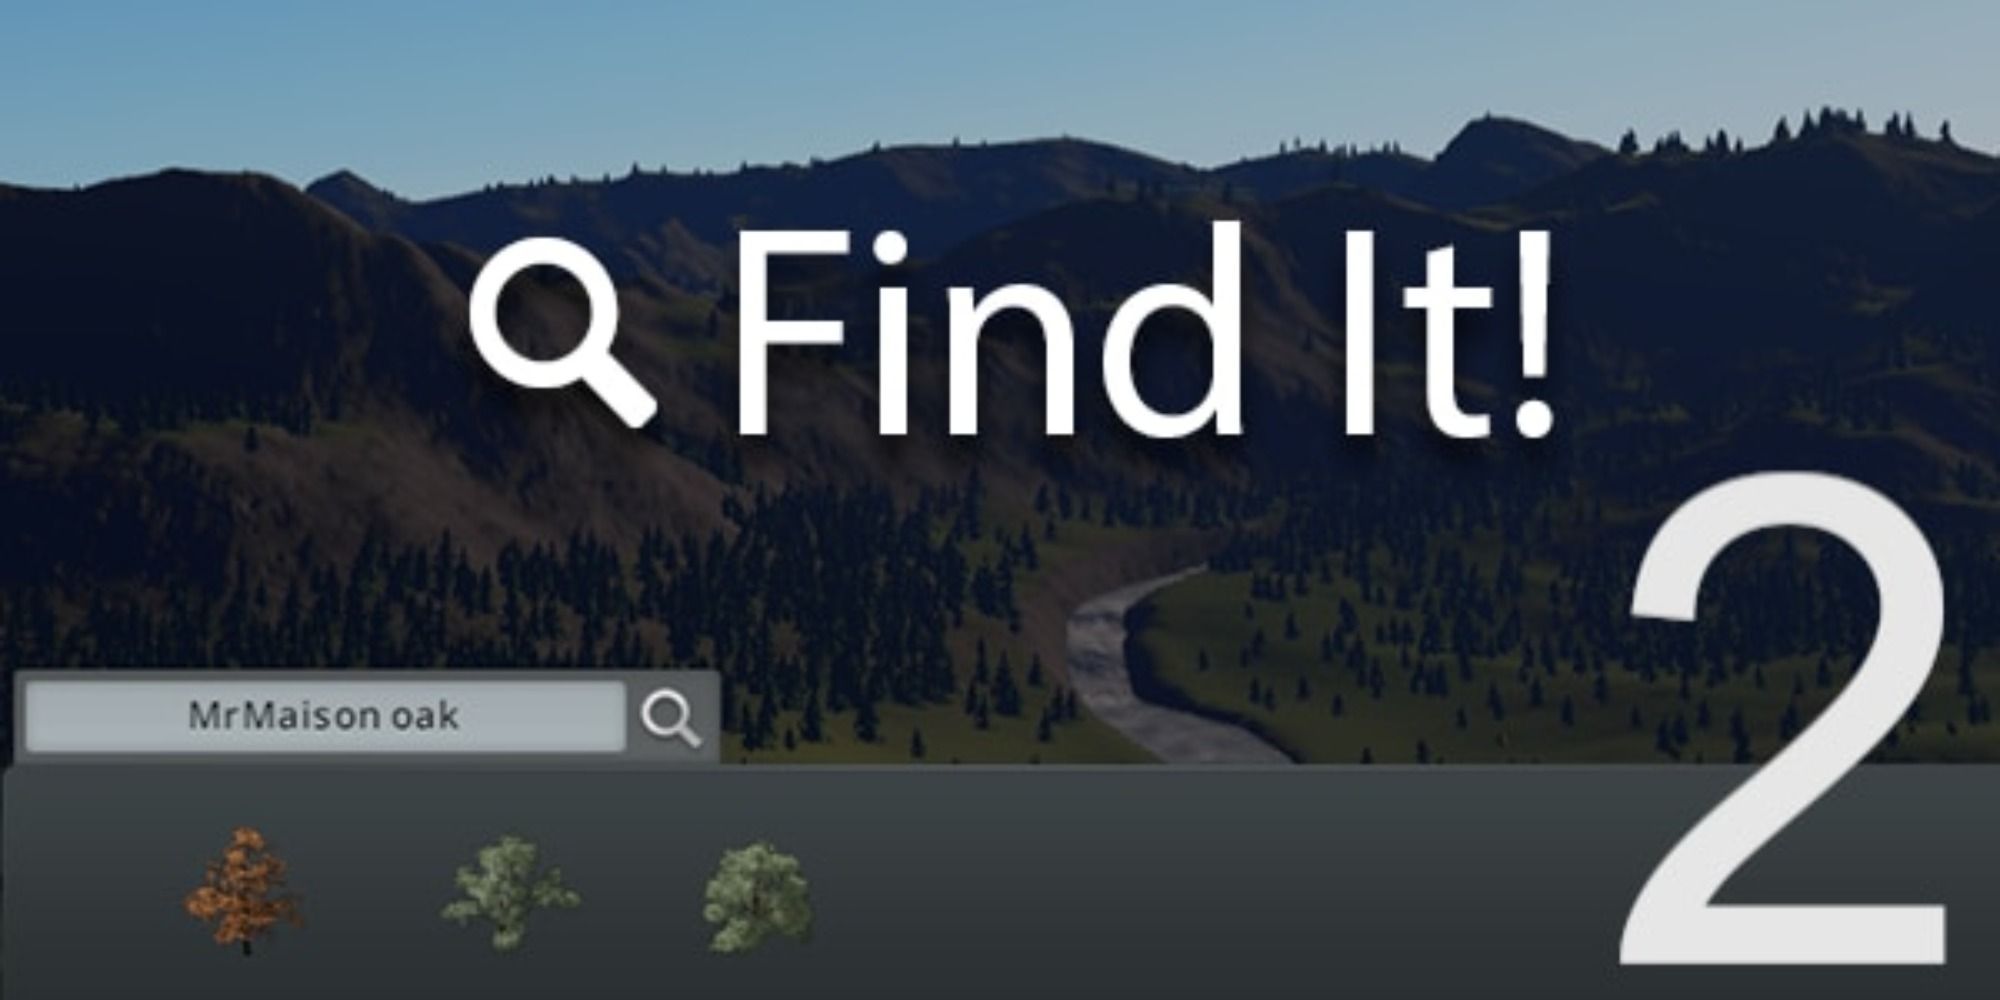 Cities Skylines Find It 2 search bar looking for trees